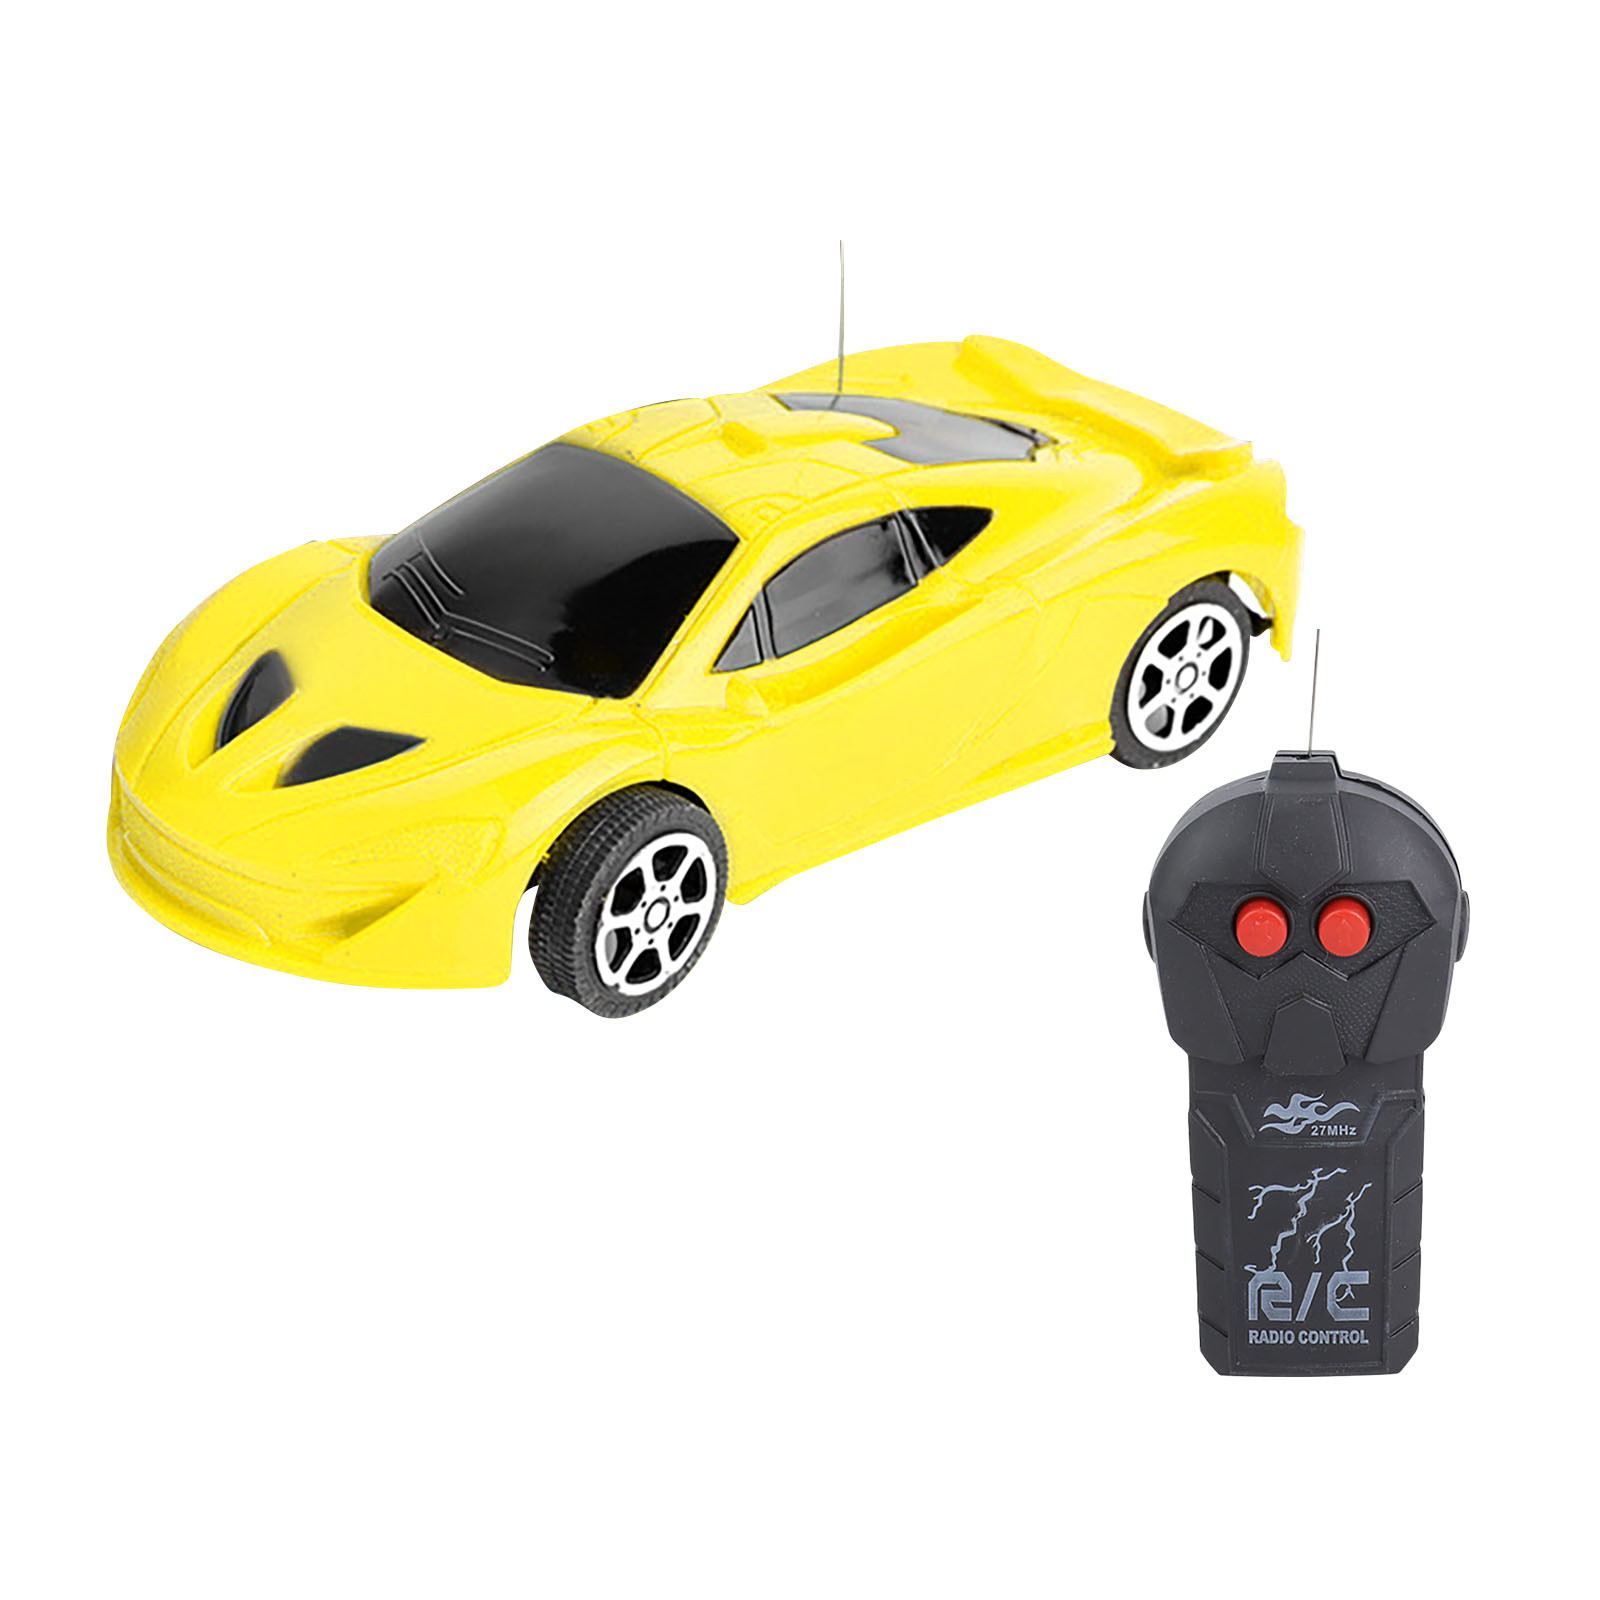 Elainilye Simulation Simulation Model Toy 1: 24 Electric Two Way Remote Control Vehicle Simulation Car Model Children Toy Car - image 1 of 2